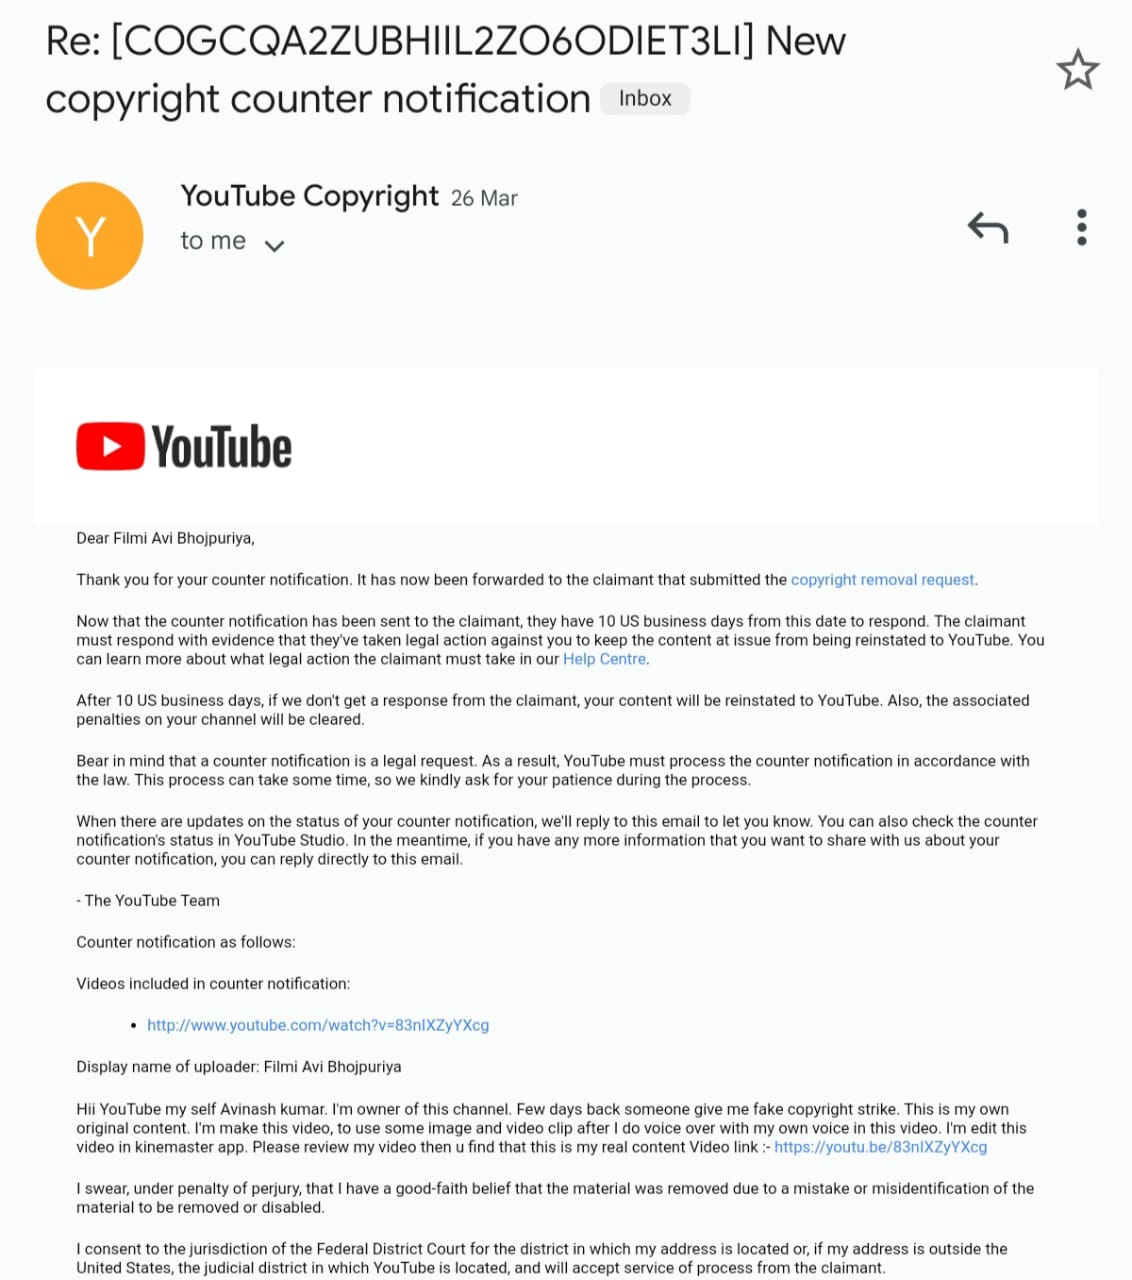 TeamYouTube on Twitter: "@AviAvin07187638 sorry about that! we process your counter  notification by forwarding it to the claimant, so the 10 business day  period doesn't start until *they* receive the claim. more